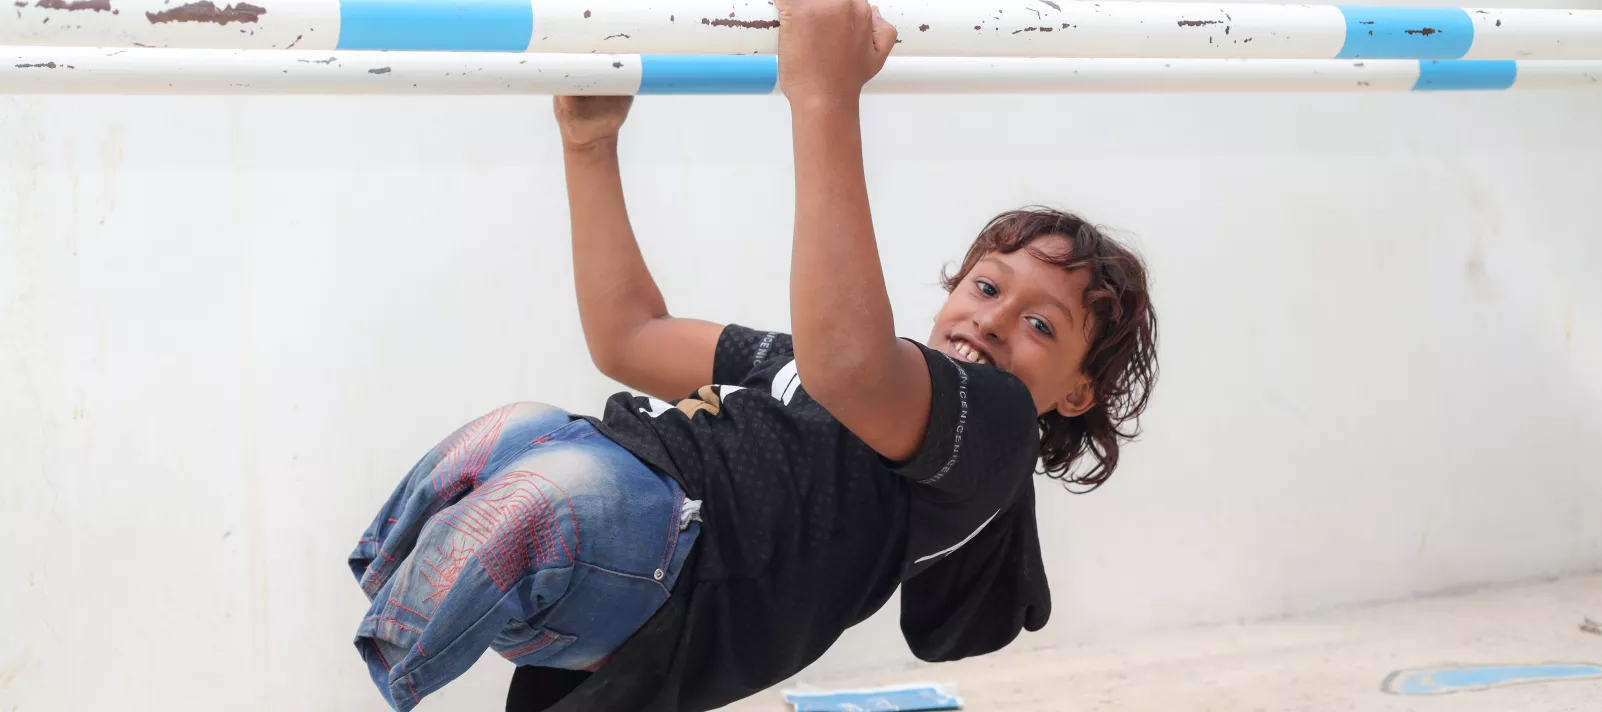 Emad, 11, uses the balance beam in the prosthetic centre in Aden, Yemen on 14 October 2021.